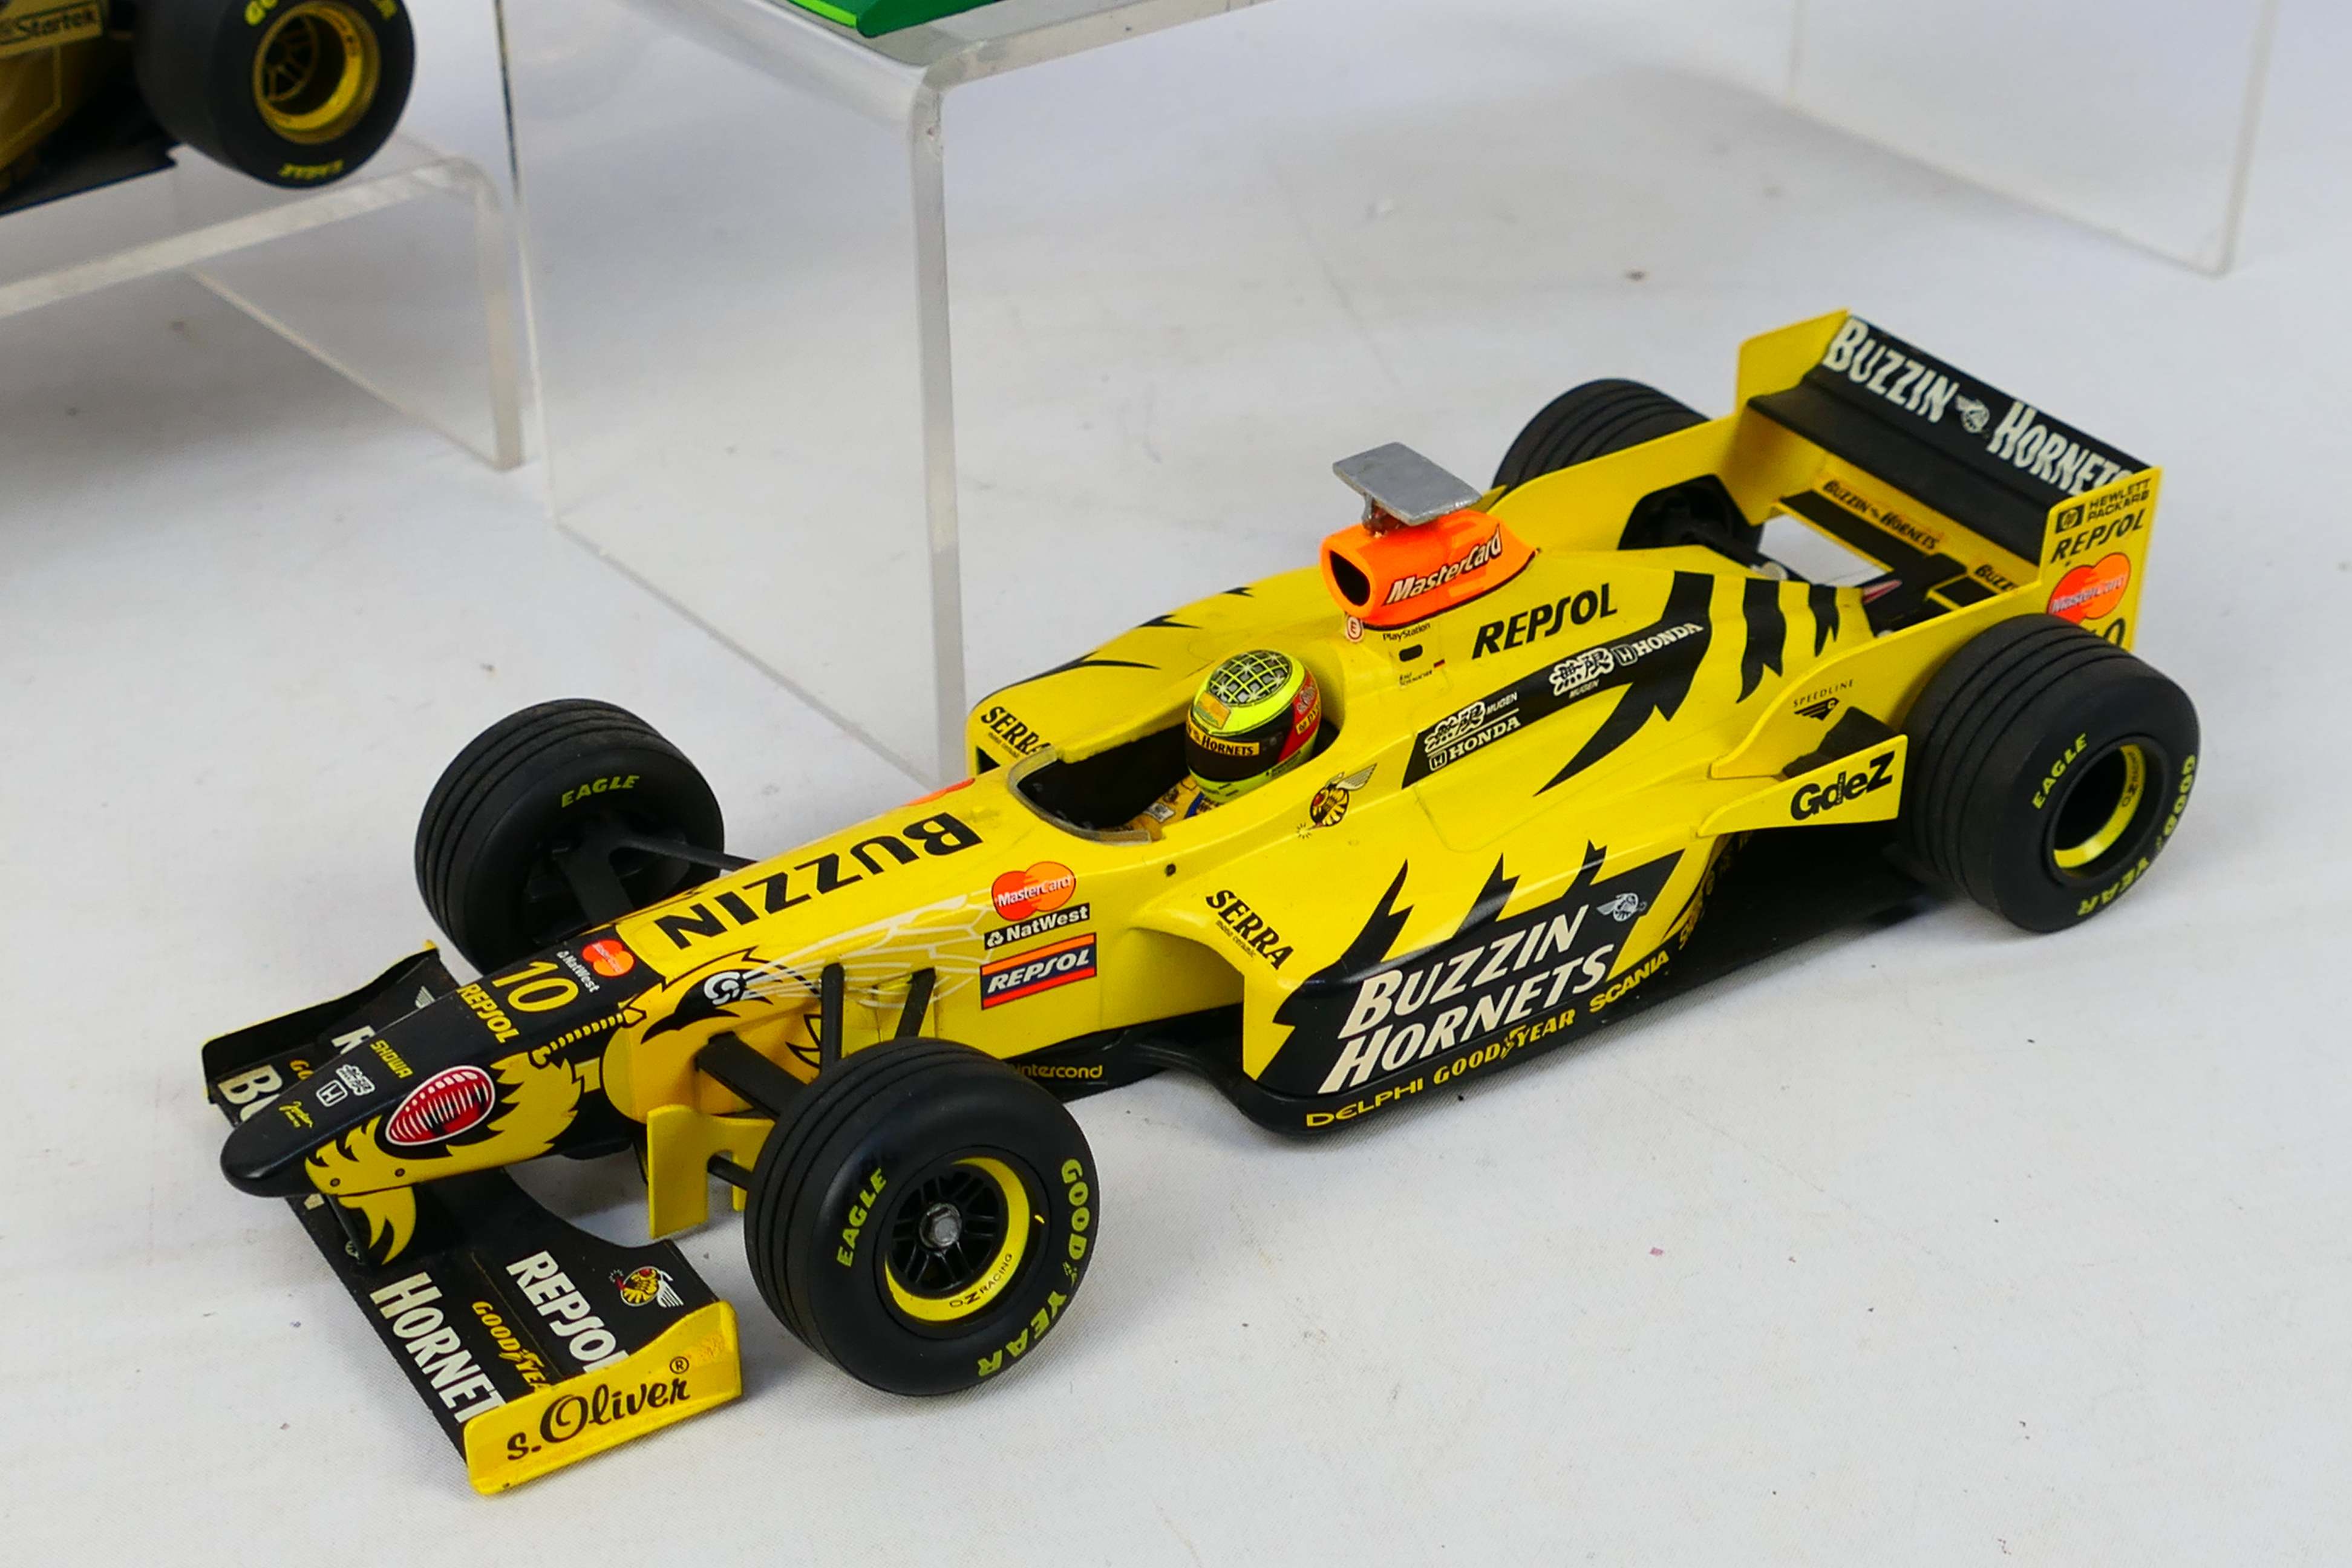 Minichamps - 3 x unboxed F1 cars in 1:18 scale, a Jordan Mugen Honda 198, - Image 3 of 4